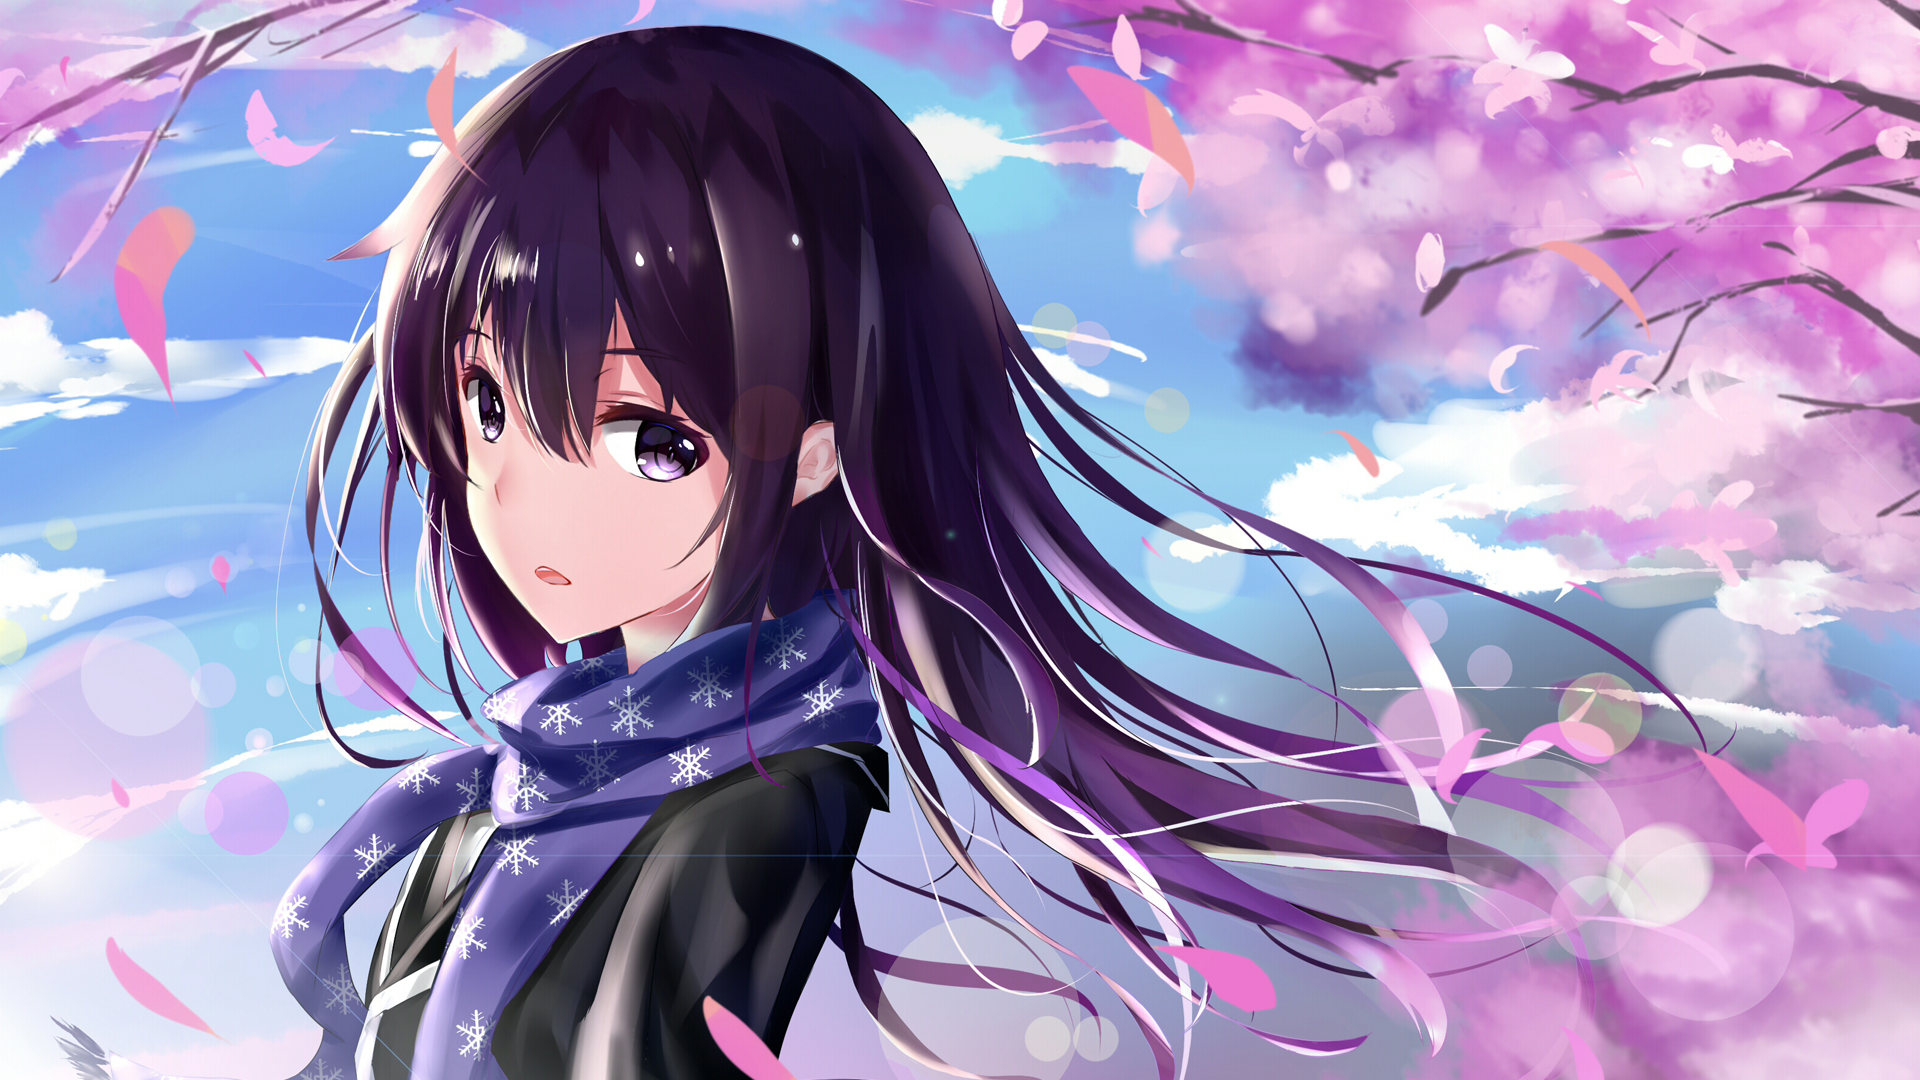 Download Purple Anime Girl Wallpaper, HD Background Download